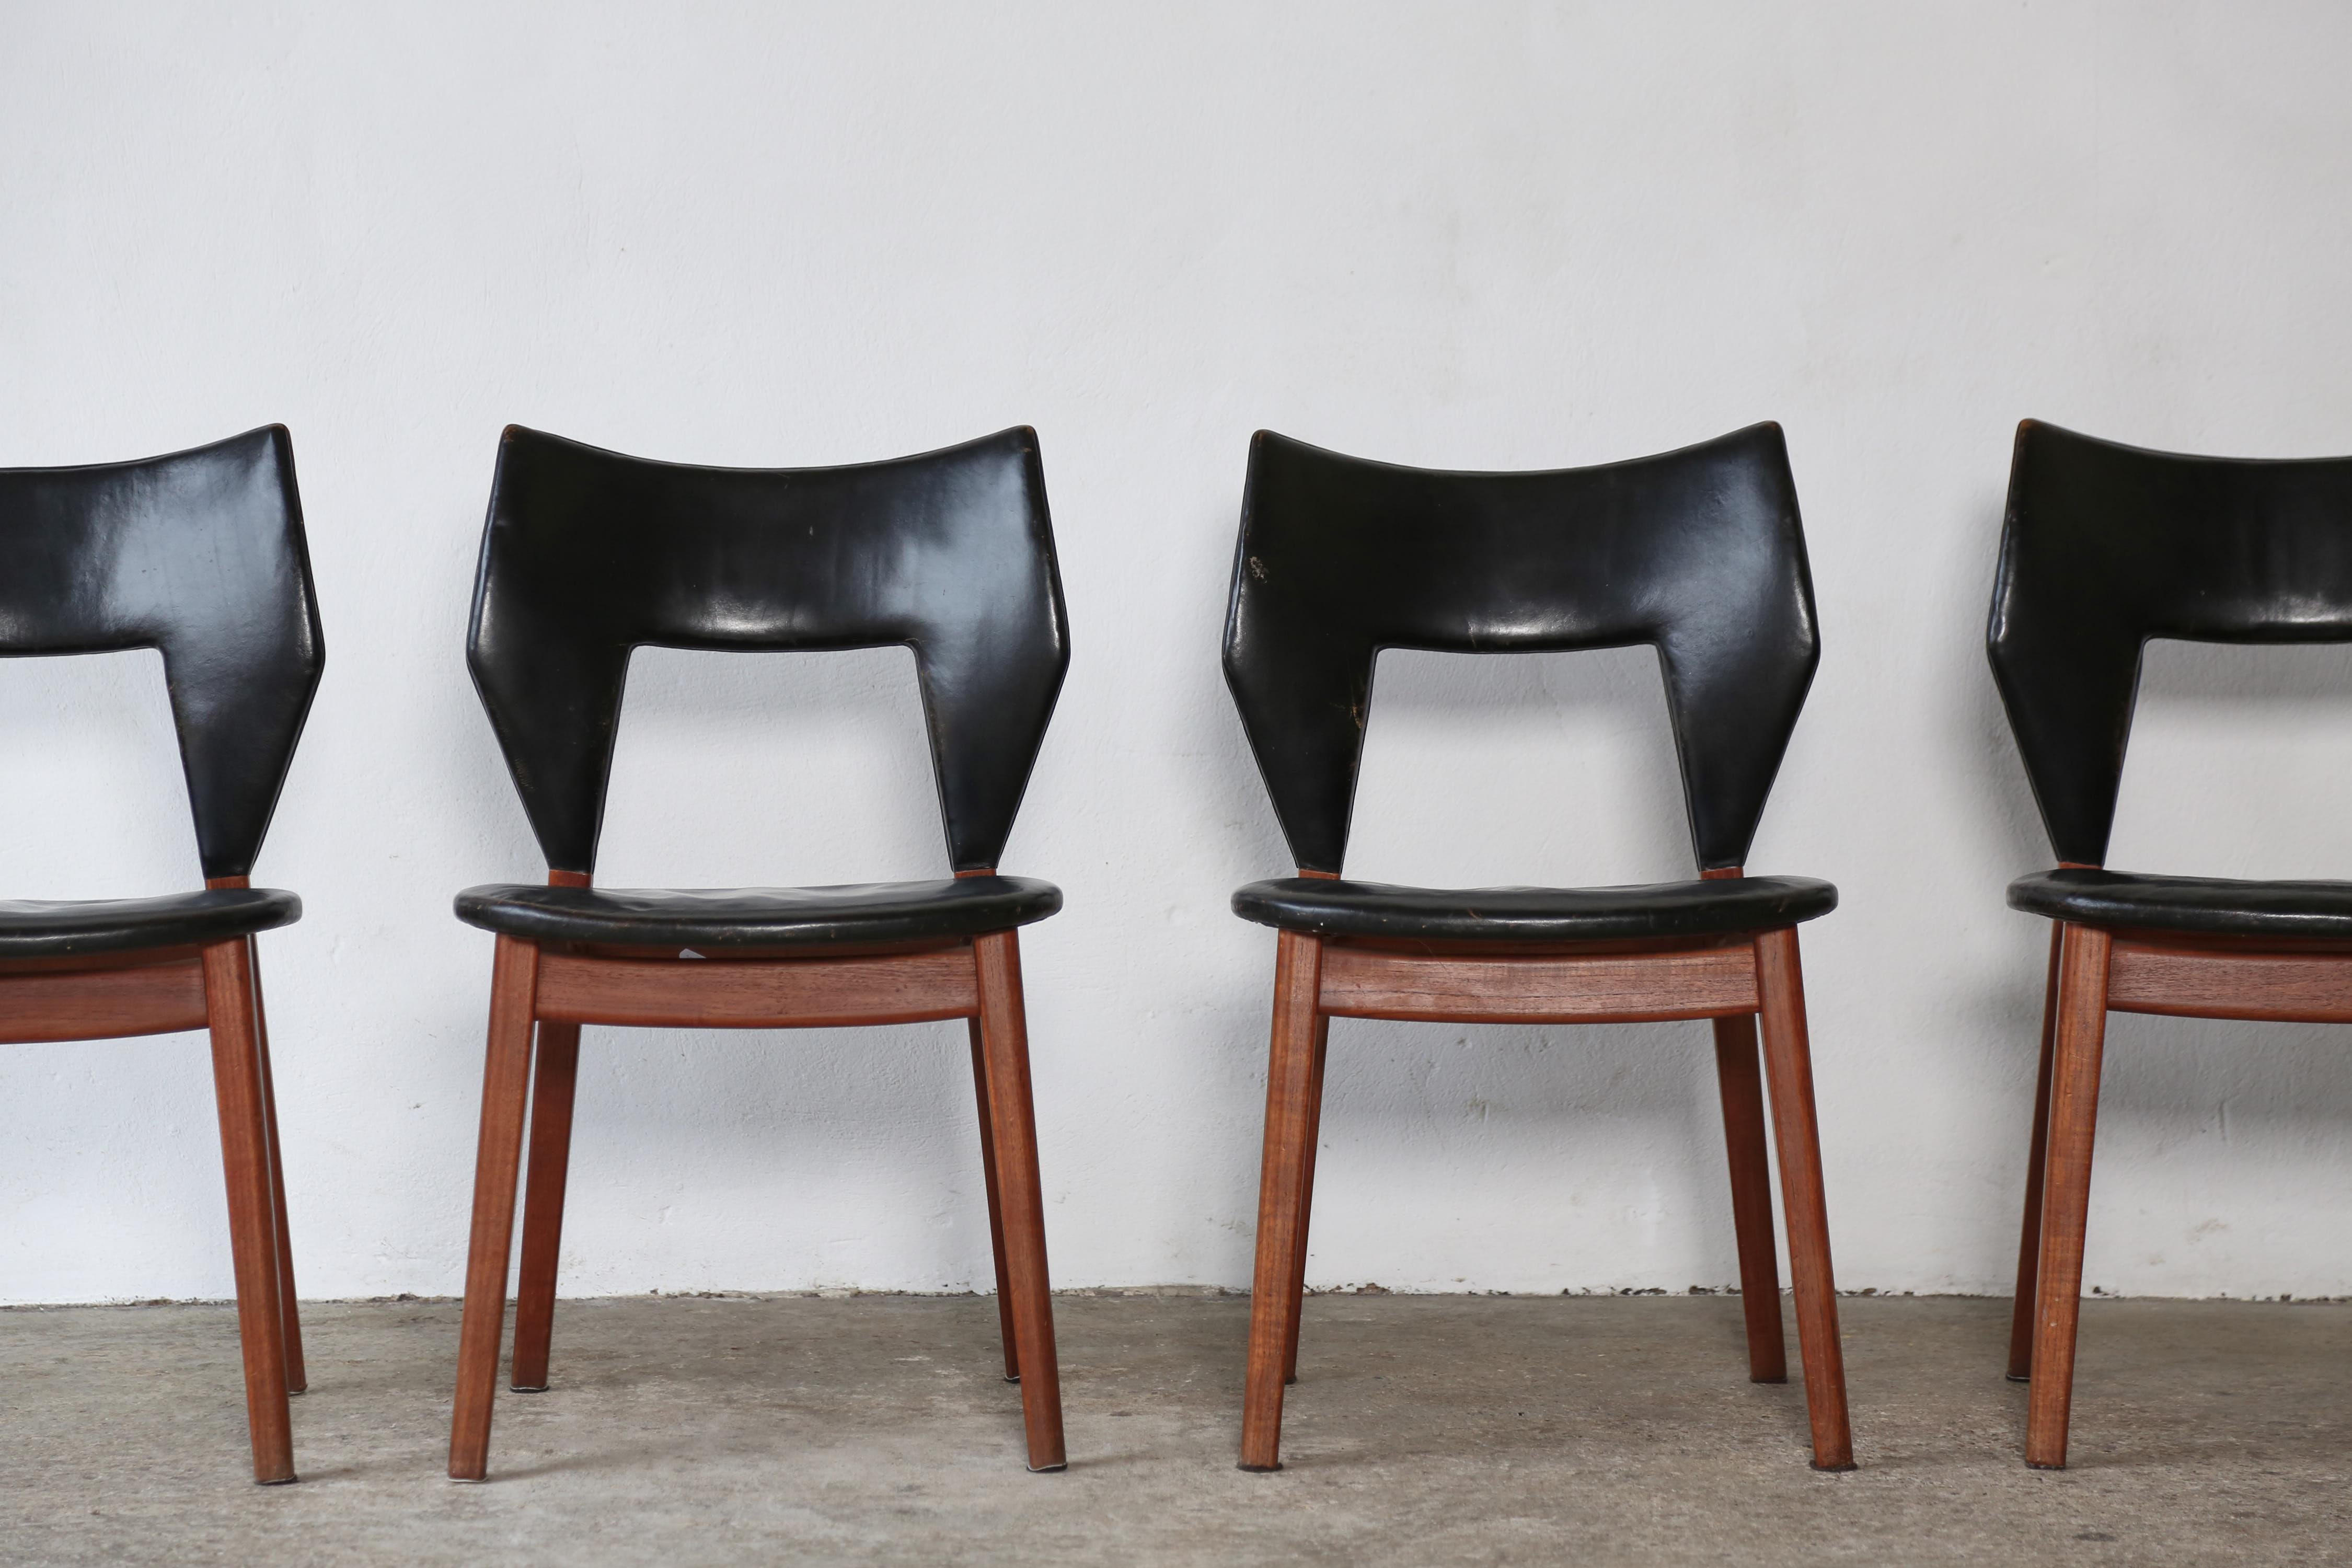 Scandinavian Modern Edvard and Tove Kindt-Larsen Dining Chairs, Thorald Madsens, Denmark, 1950s For Sale